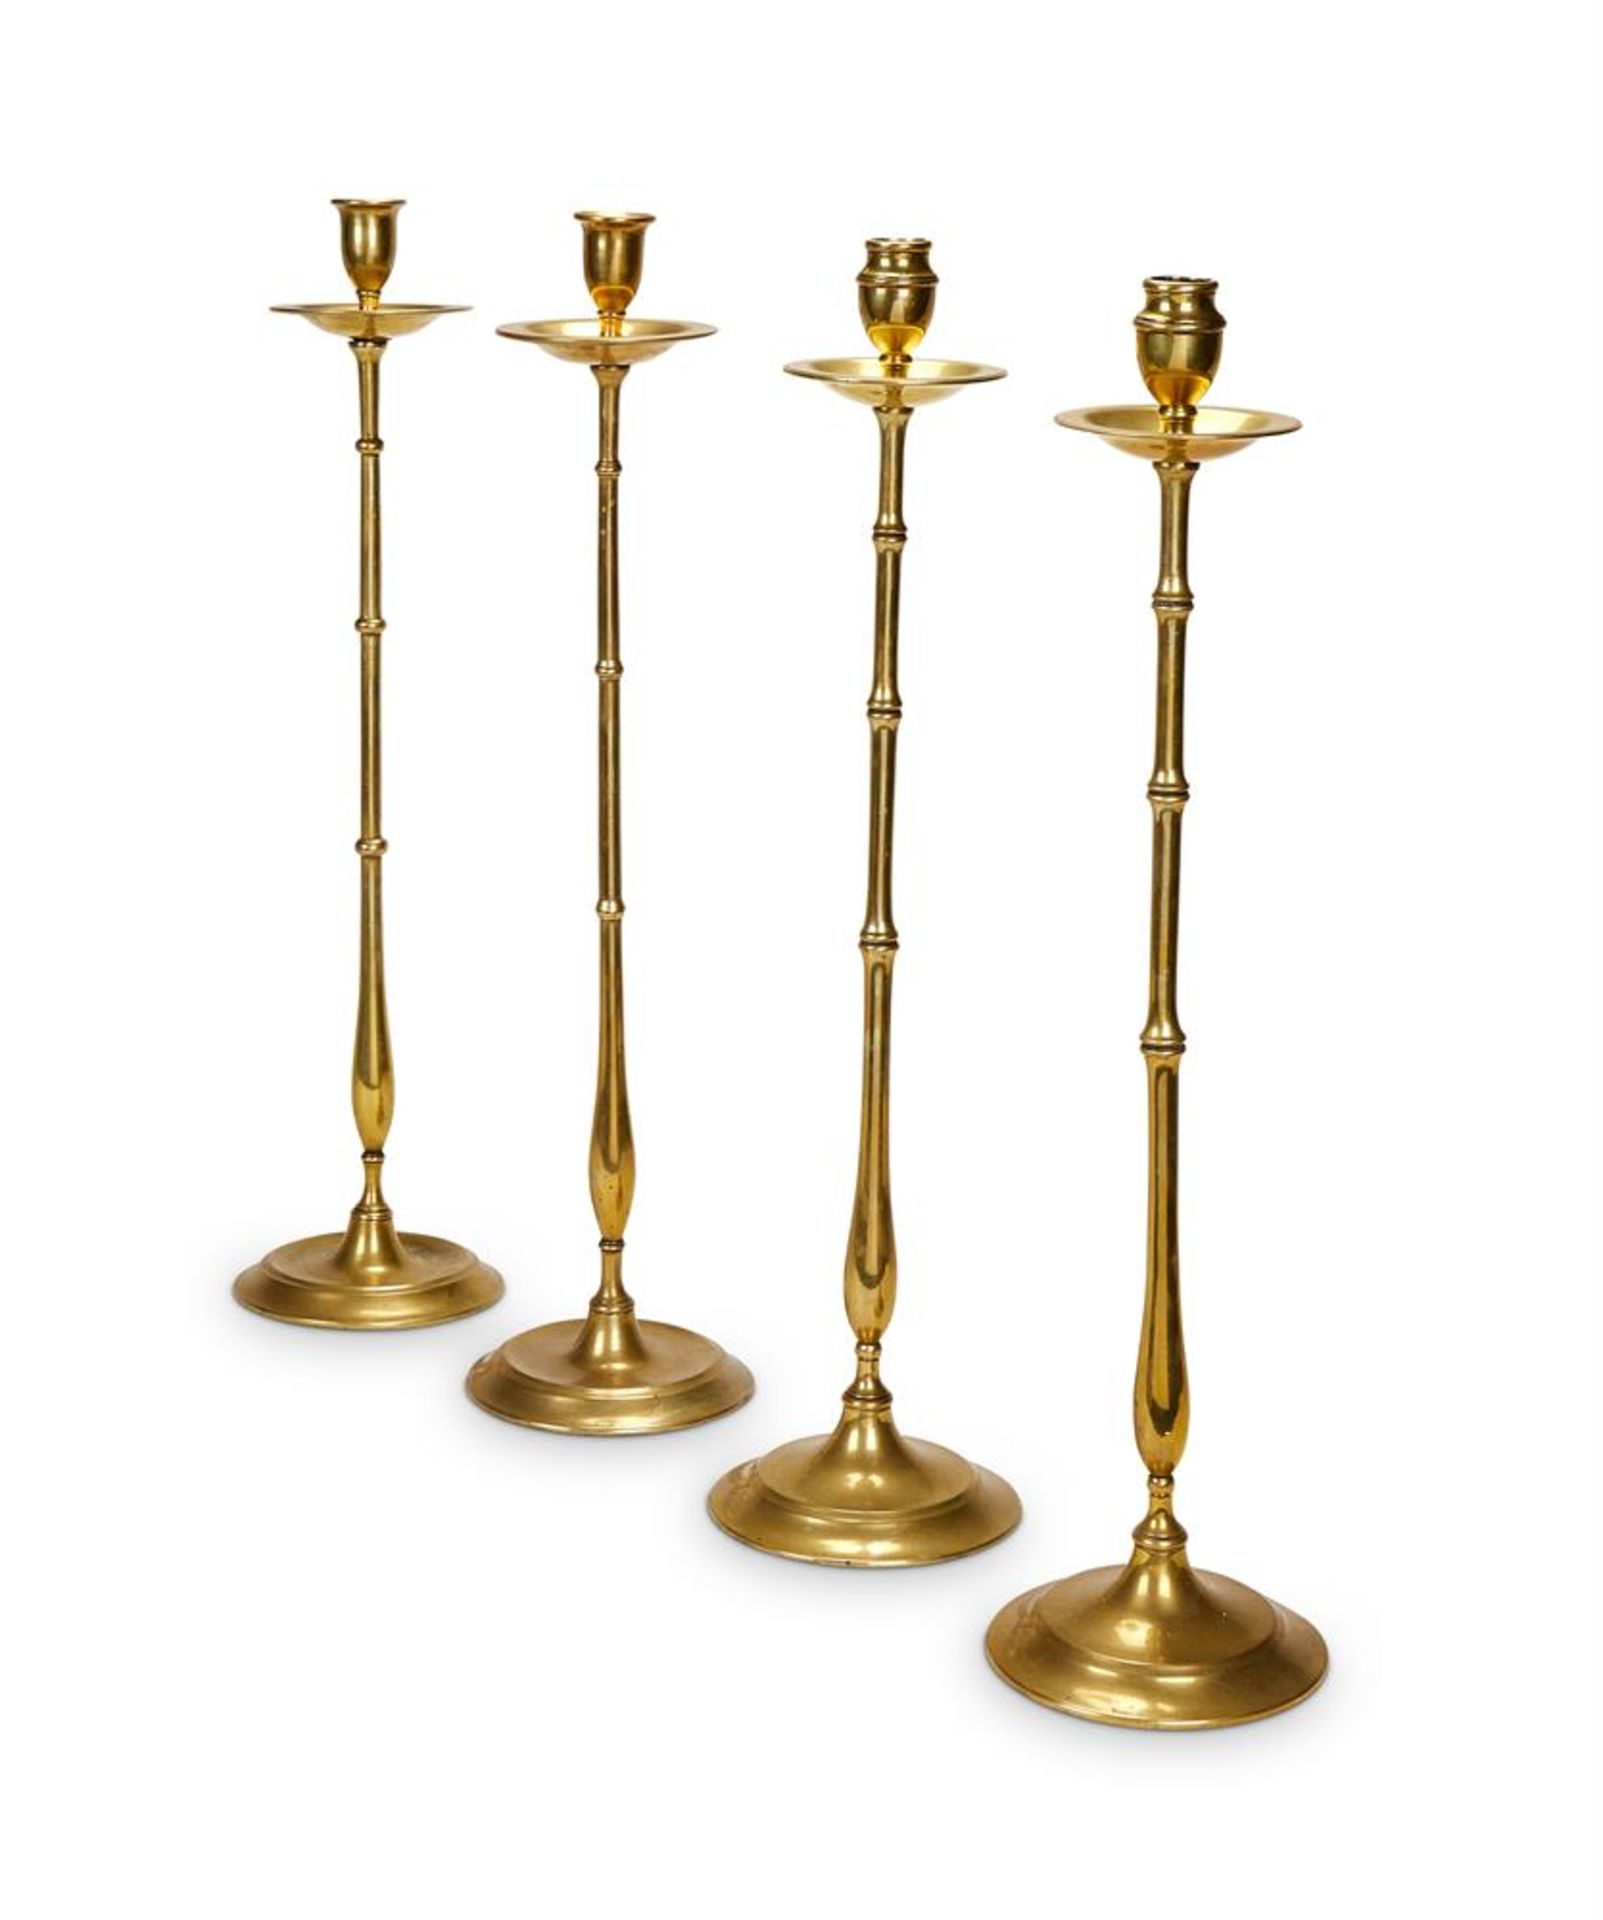 TWO PAIRS OF ARTS AND CRAFT BRONZE CANDLESTICKS, CIRCA 1890